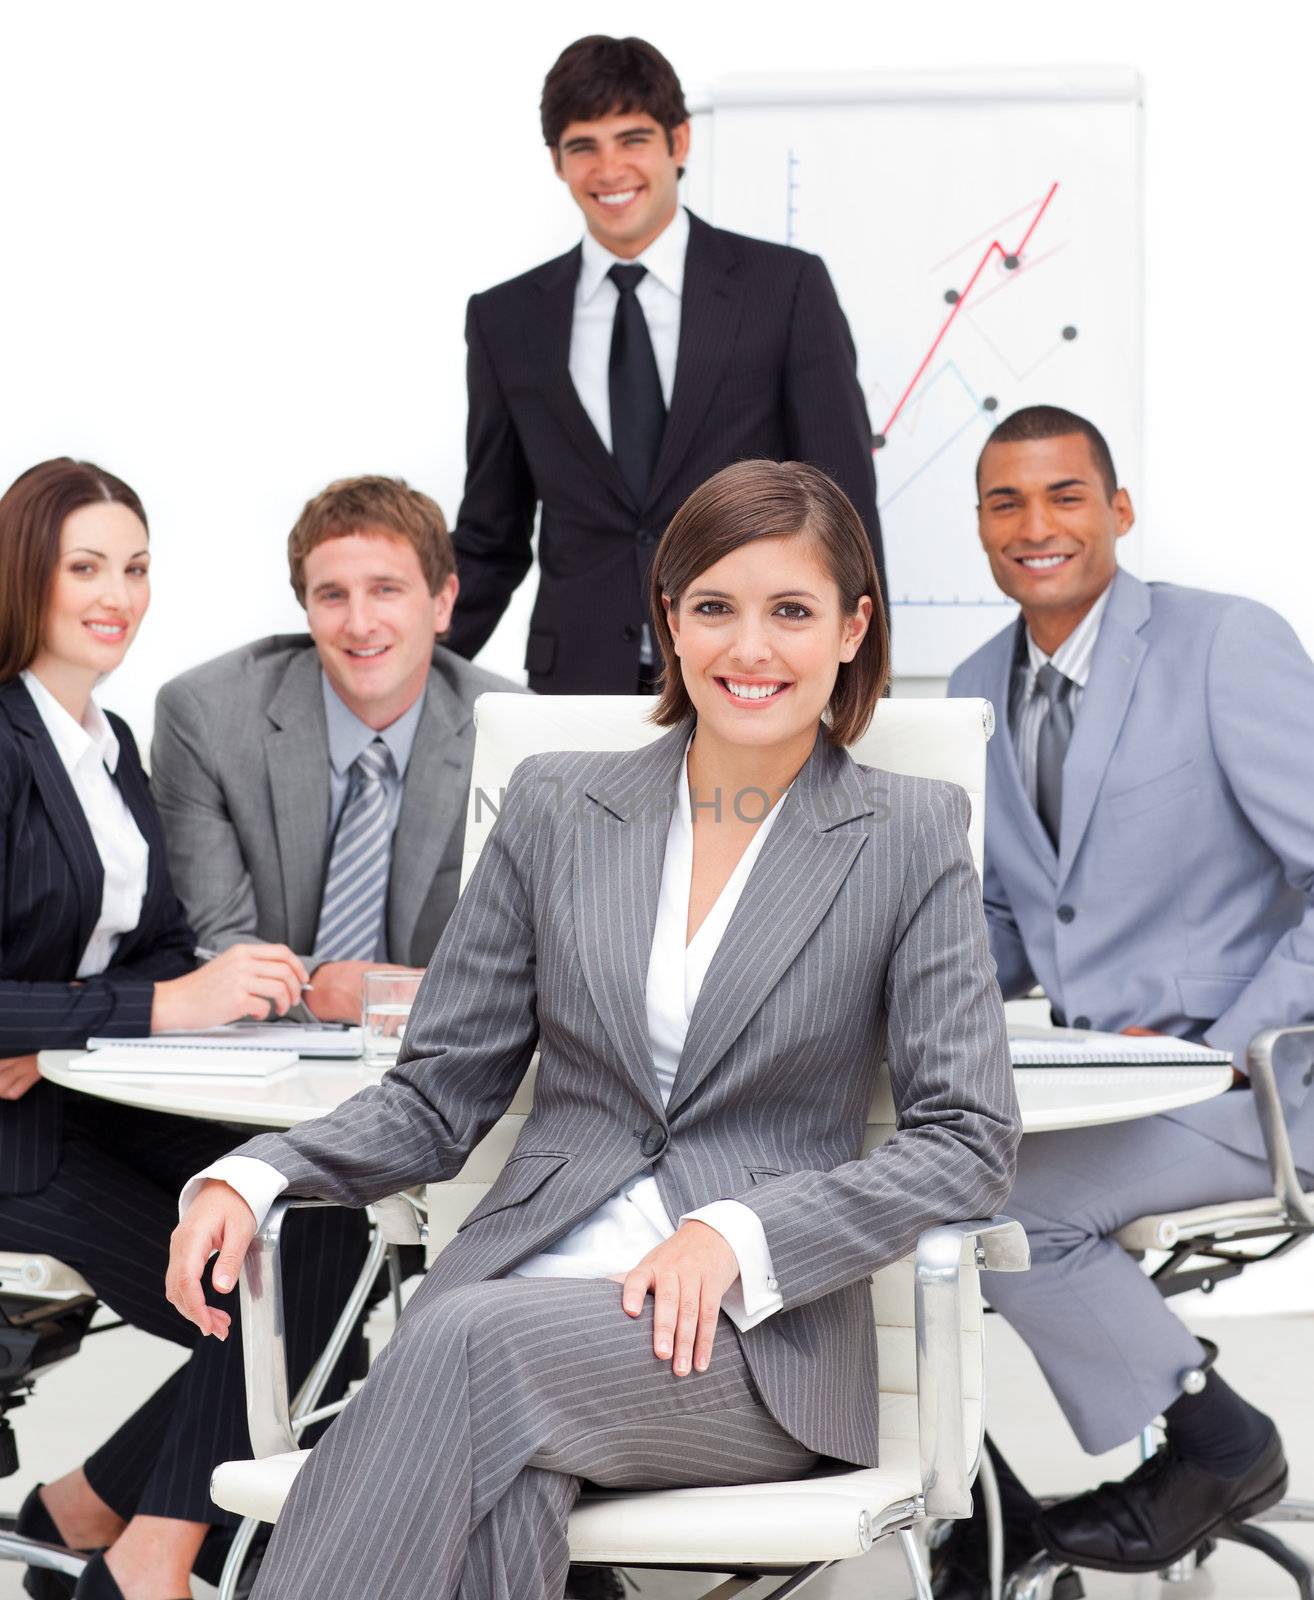 Assertive female executive sitting in front of her team in a meeting